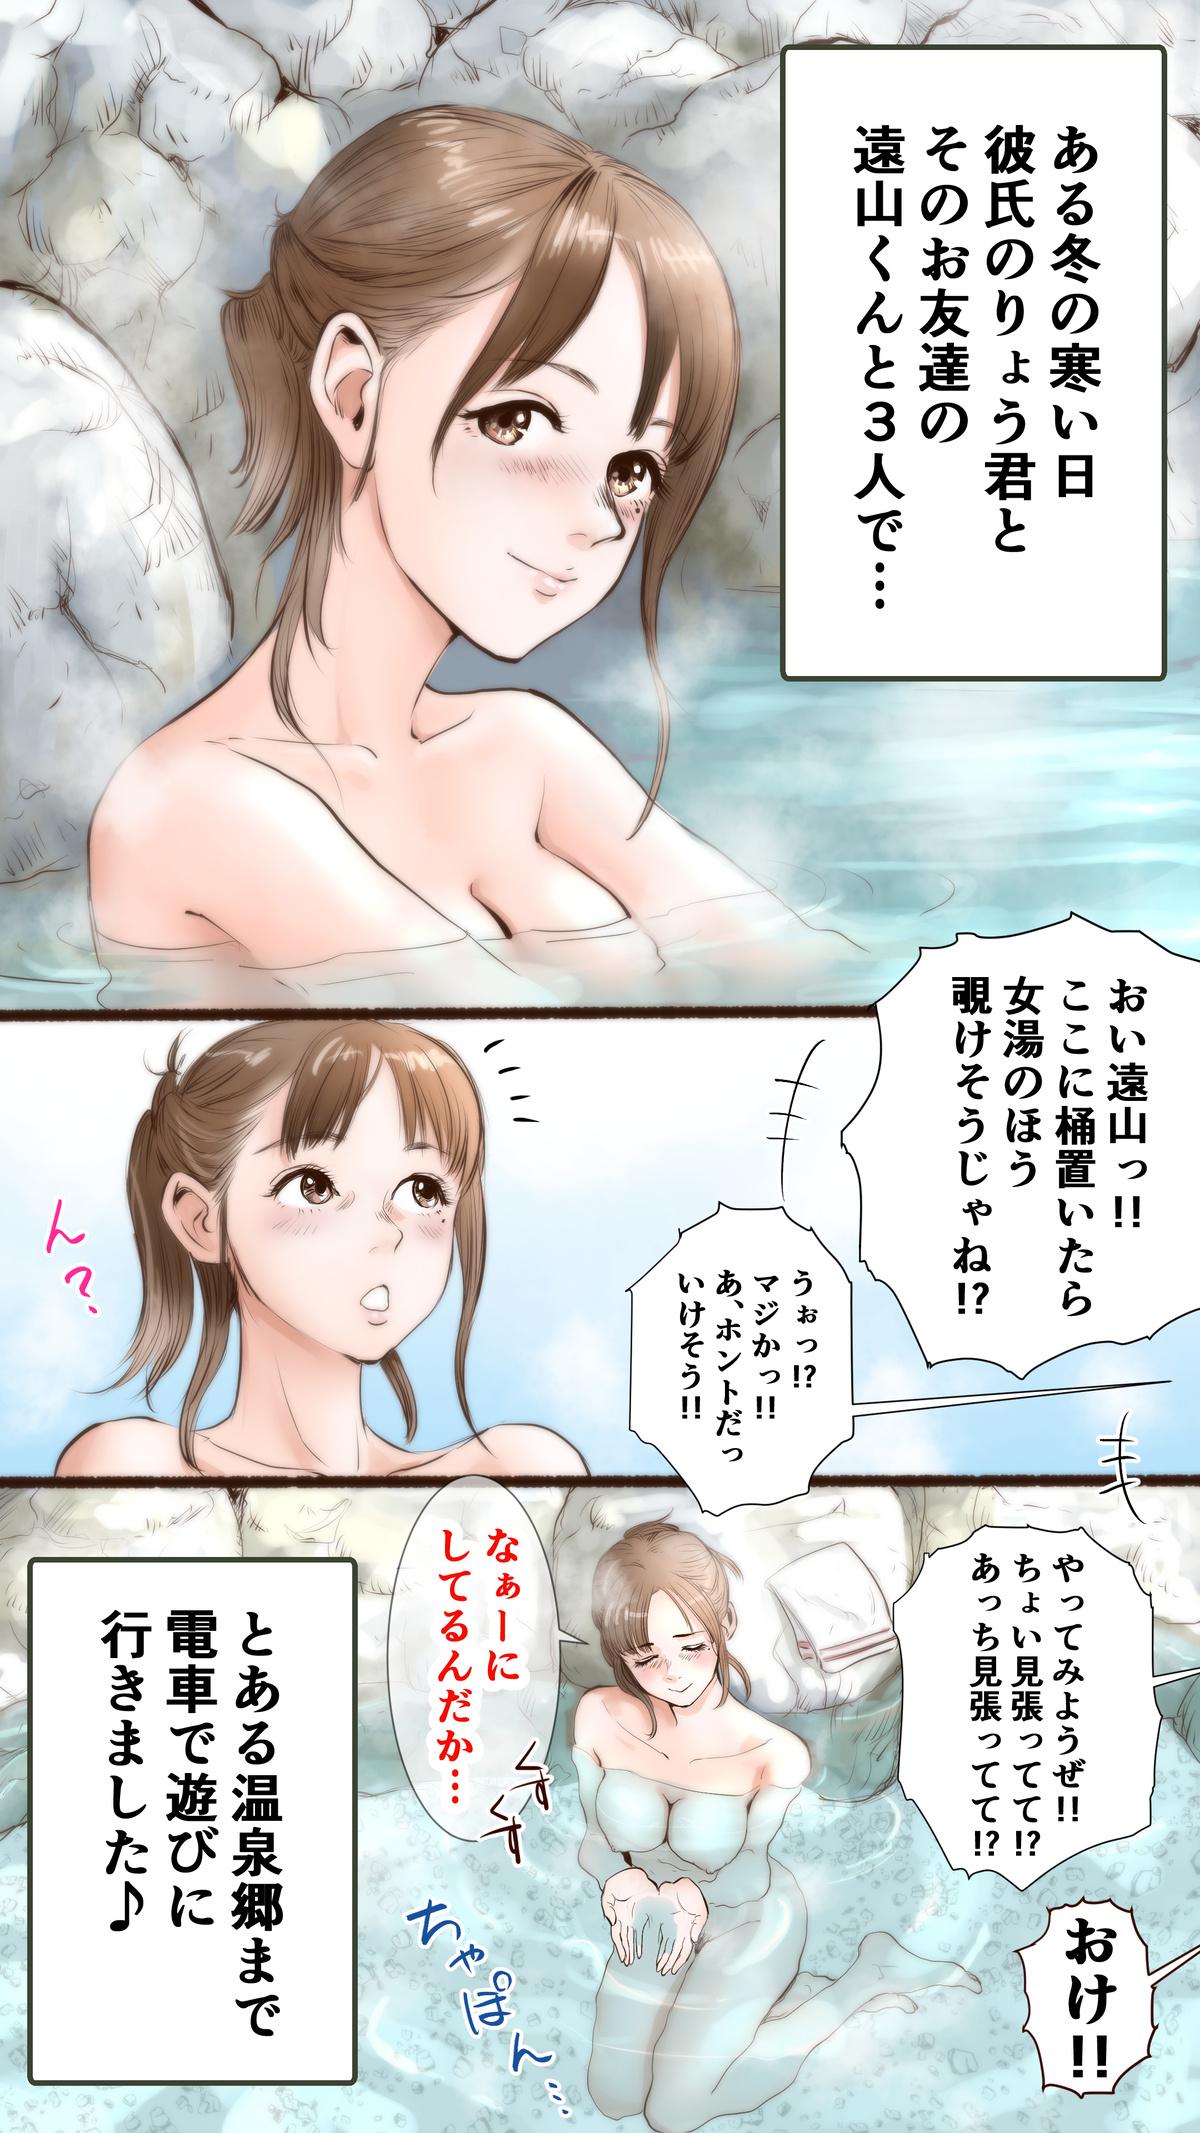 Story of Hot Spring Hotel 0